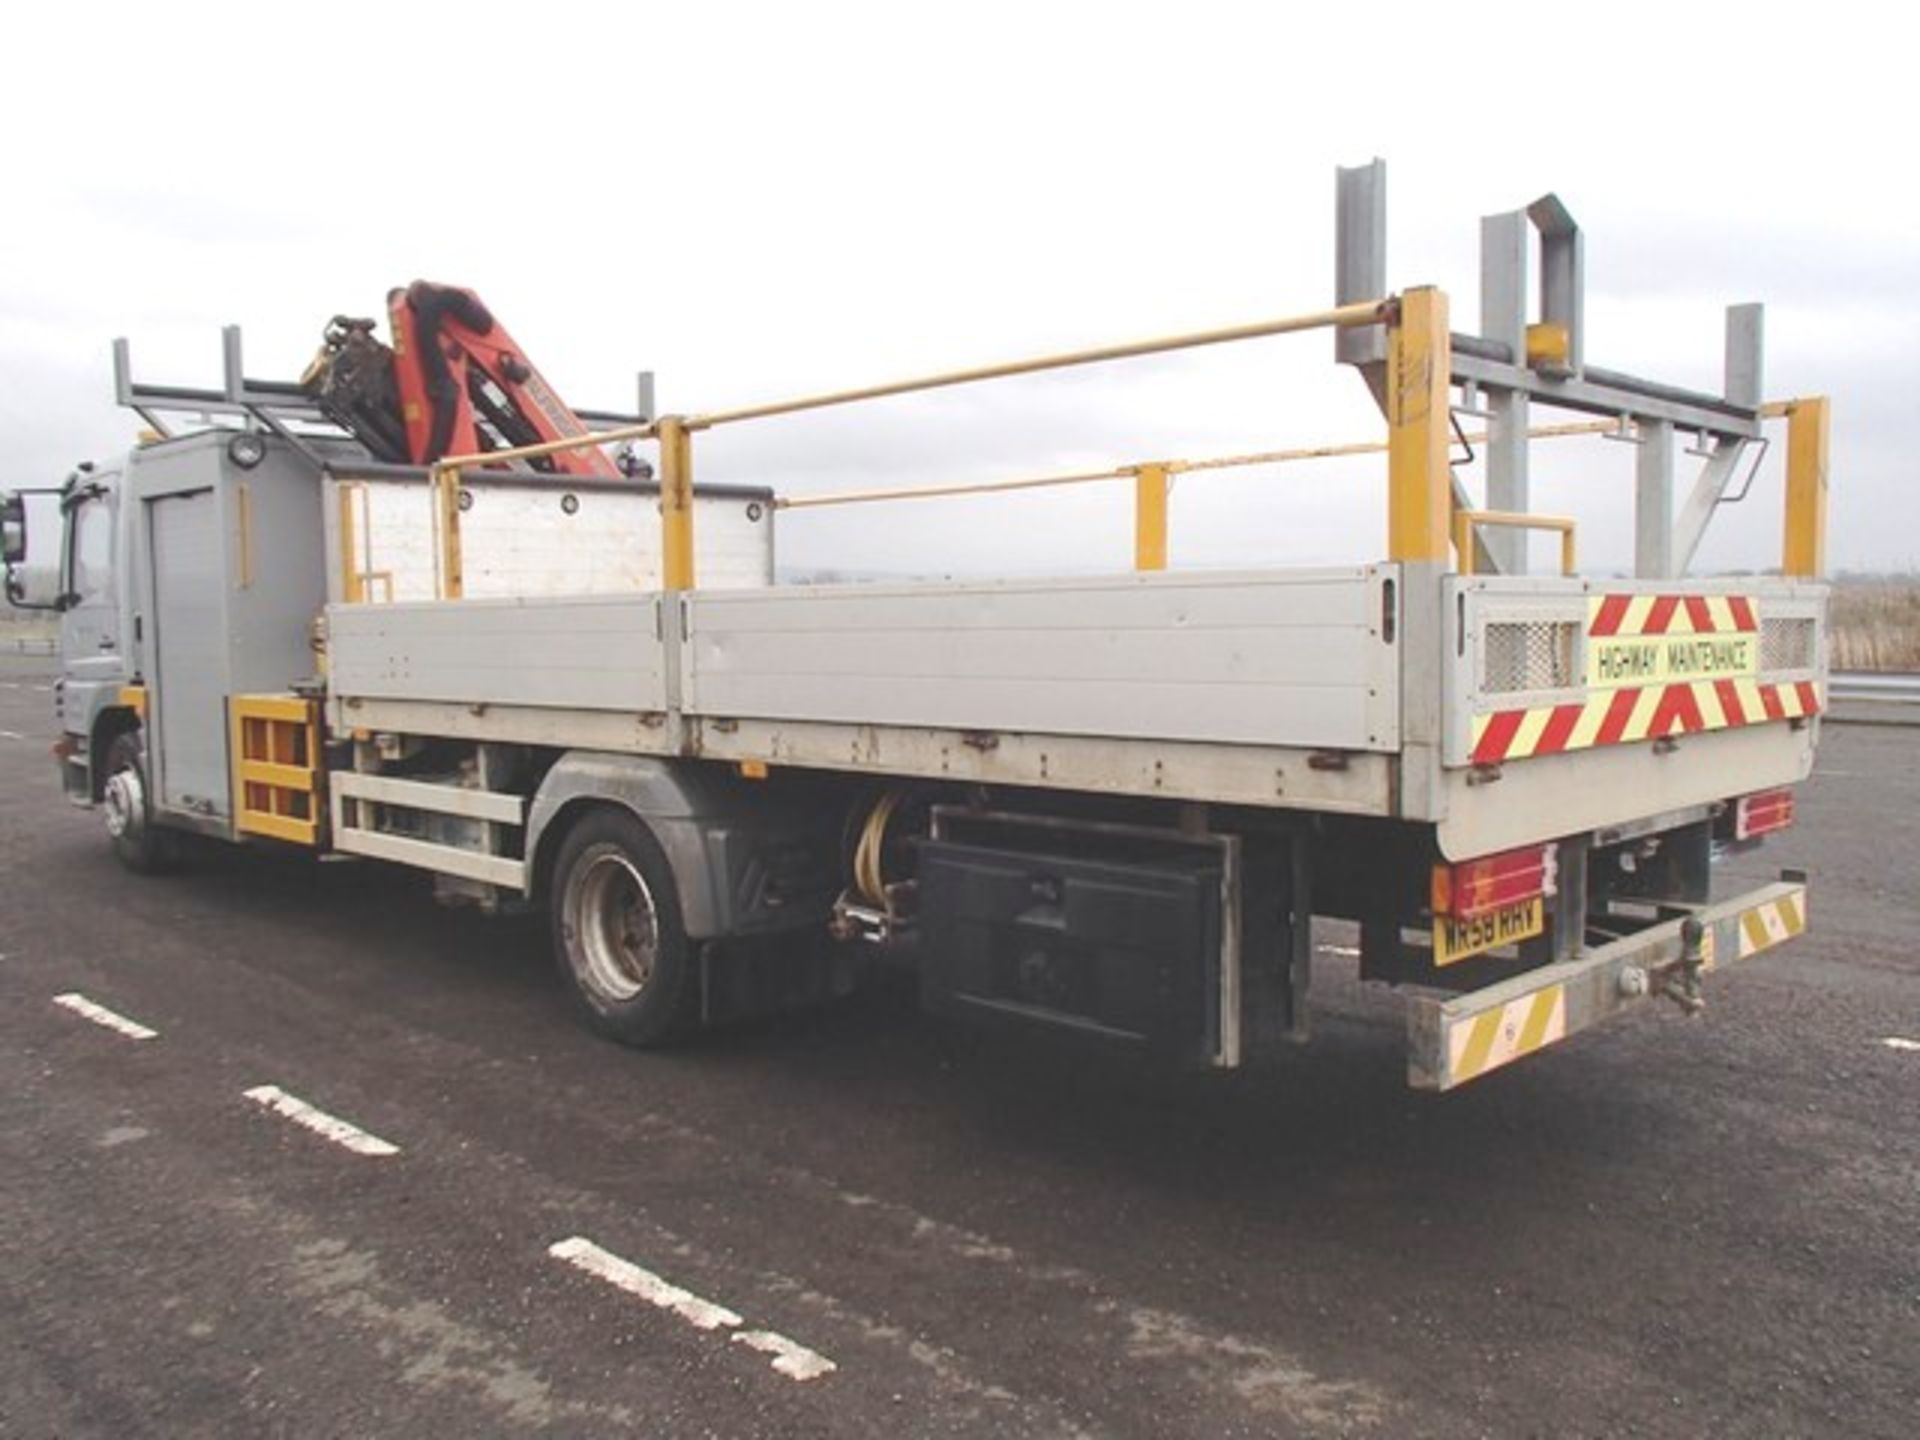 MERCEDES ATEGO - 4250cc DROPSIDE LORRY
Body: 2 Dr Truck
Color: Silver
First Reg: 29/01/2009
Doors: 2 - Image 2 of 22